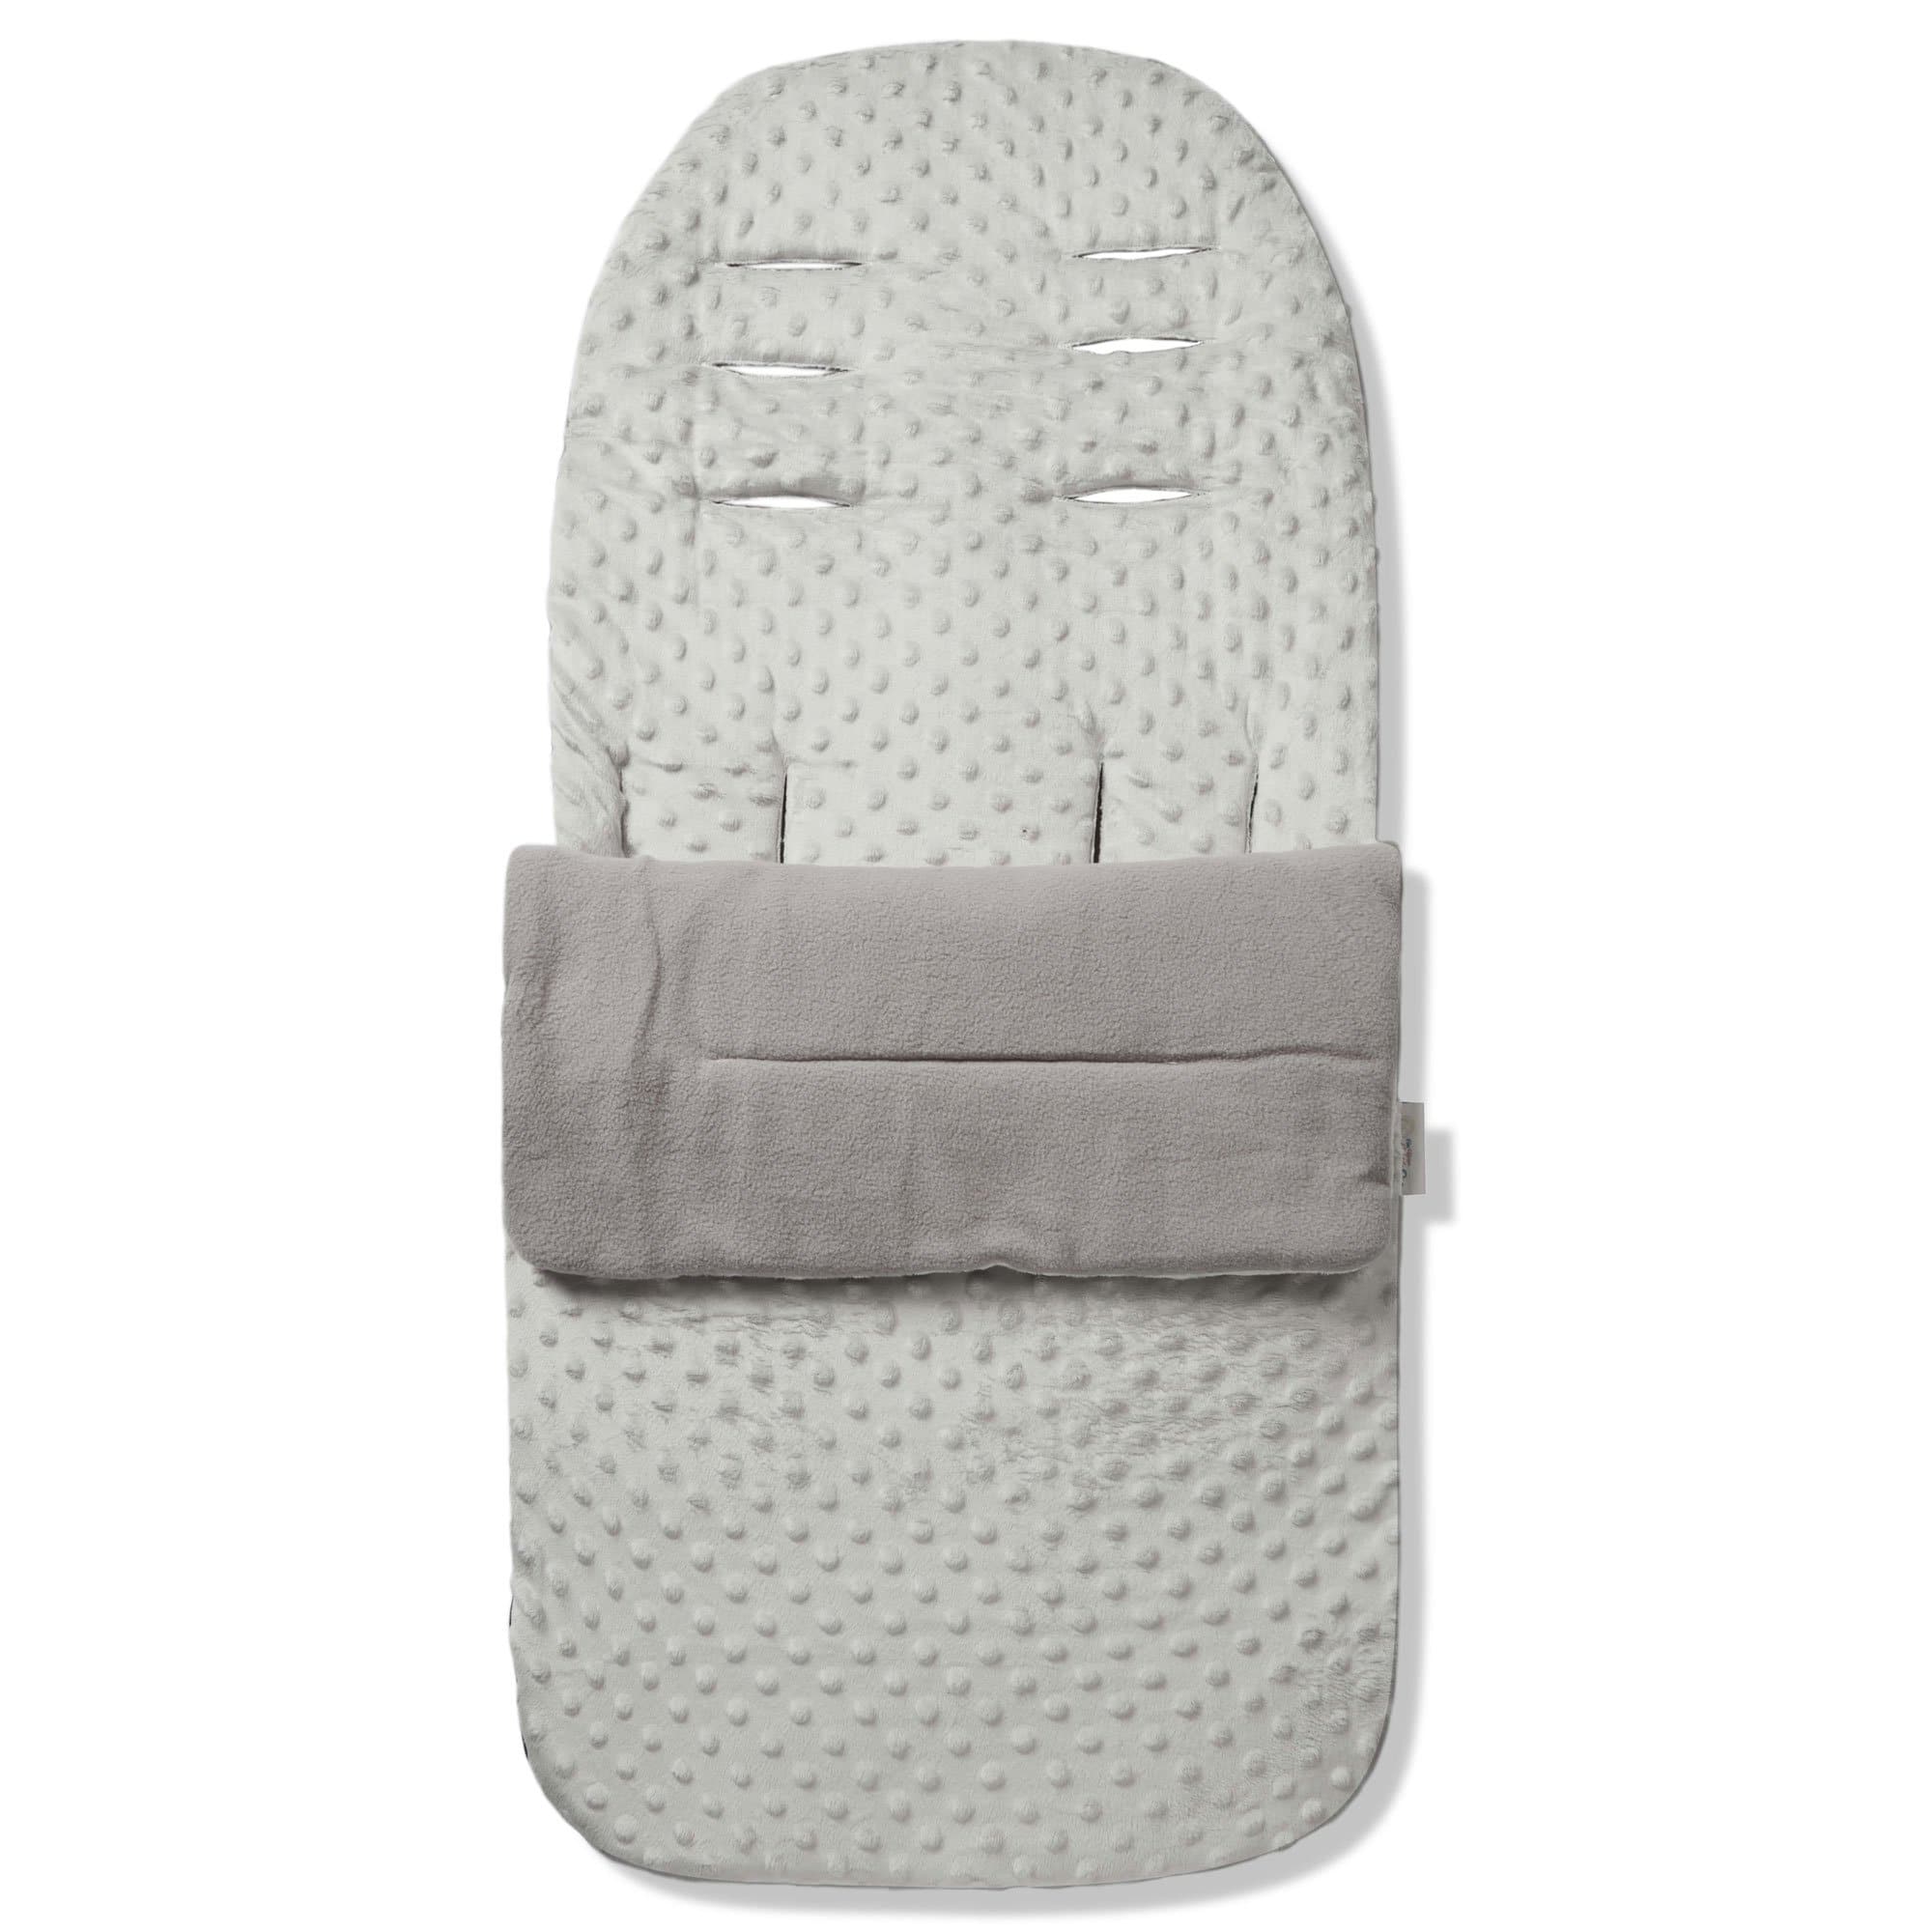 Dimple Footmuff / Cosy Toes Compatible with Mothercare - Grey / Fits All Models | For Your Little One